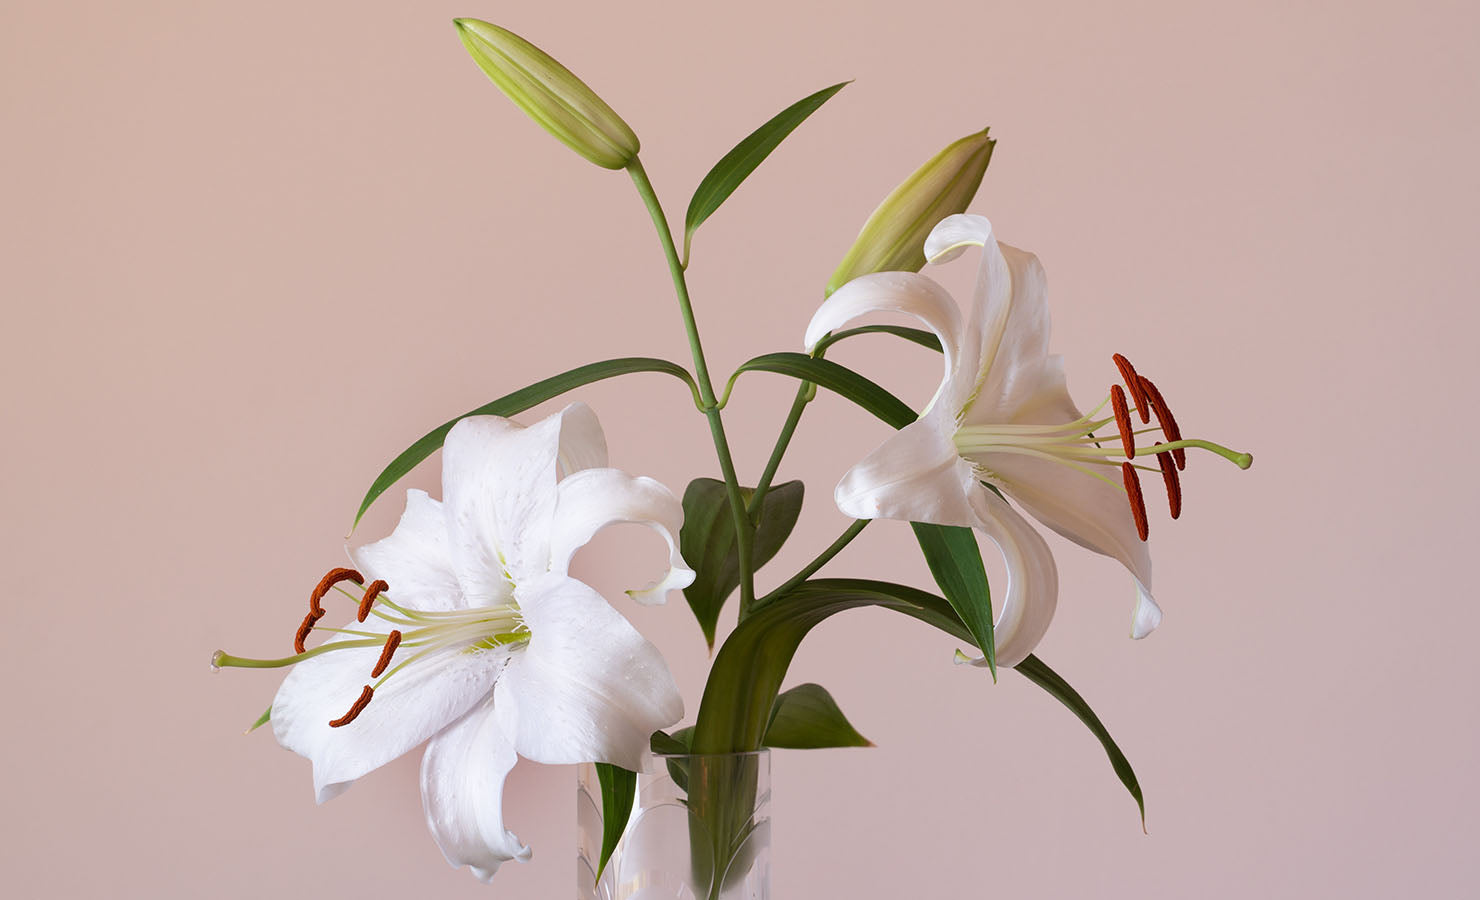 bloomthis-blog-whats-my-horoscope-flower-zodiac-flower-04-taurus-lily-lilies